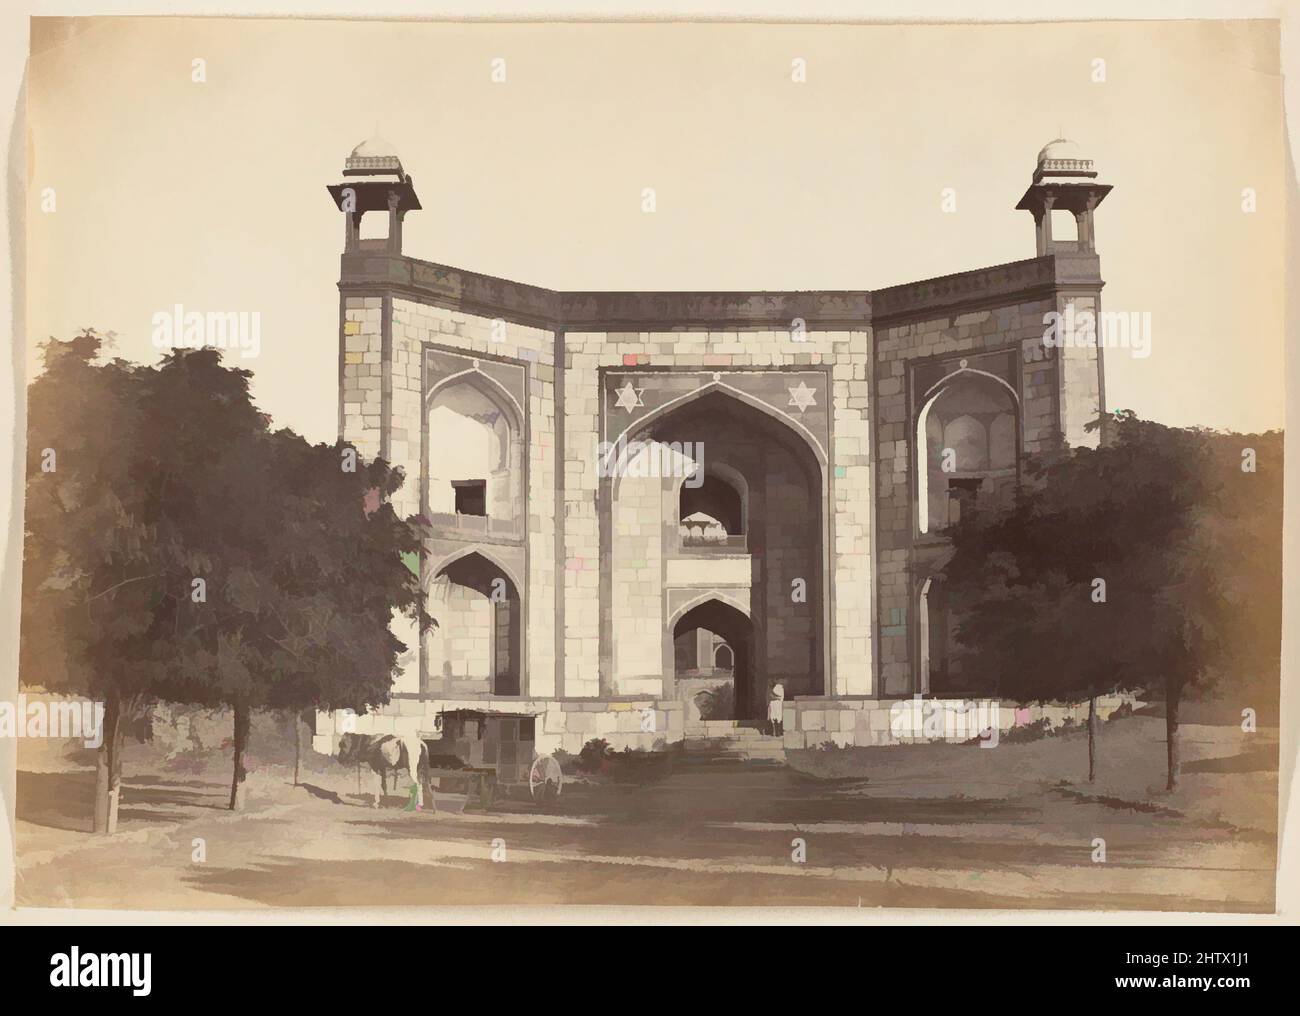 Art inspired by Gateway, 1850s, Albumen silver print, Image: 17.2 x 24.4 cm (6 3/4 x 9 5/8 in.), Photographs, Unknown, Classic works modernized by Artotop with a splash of modernity. Shapes, color and value, eye-catching visual impact on art. Emotions through freedom of artworks in a contemporary way. A timeless message pursuing a wildly creative new direction. Artists turning to the digital medium and creating the Artotop NFT Stock Photo